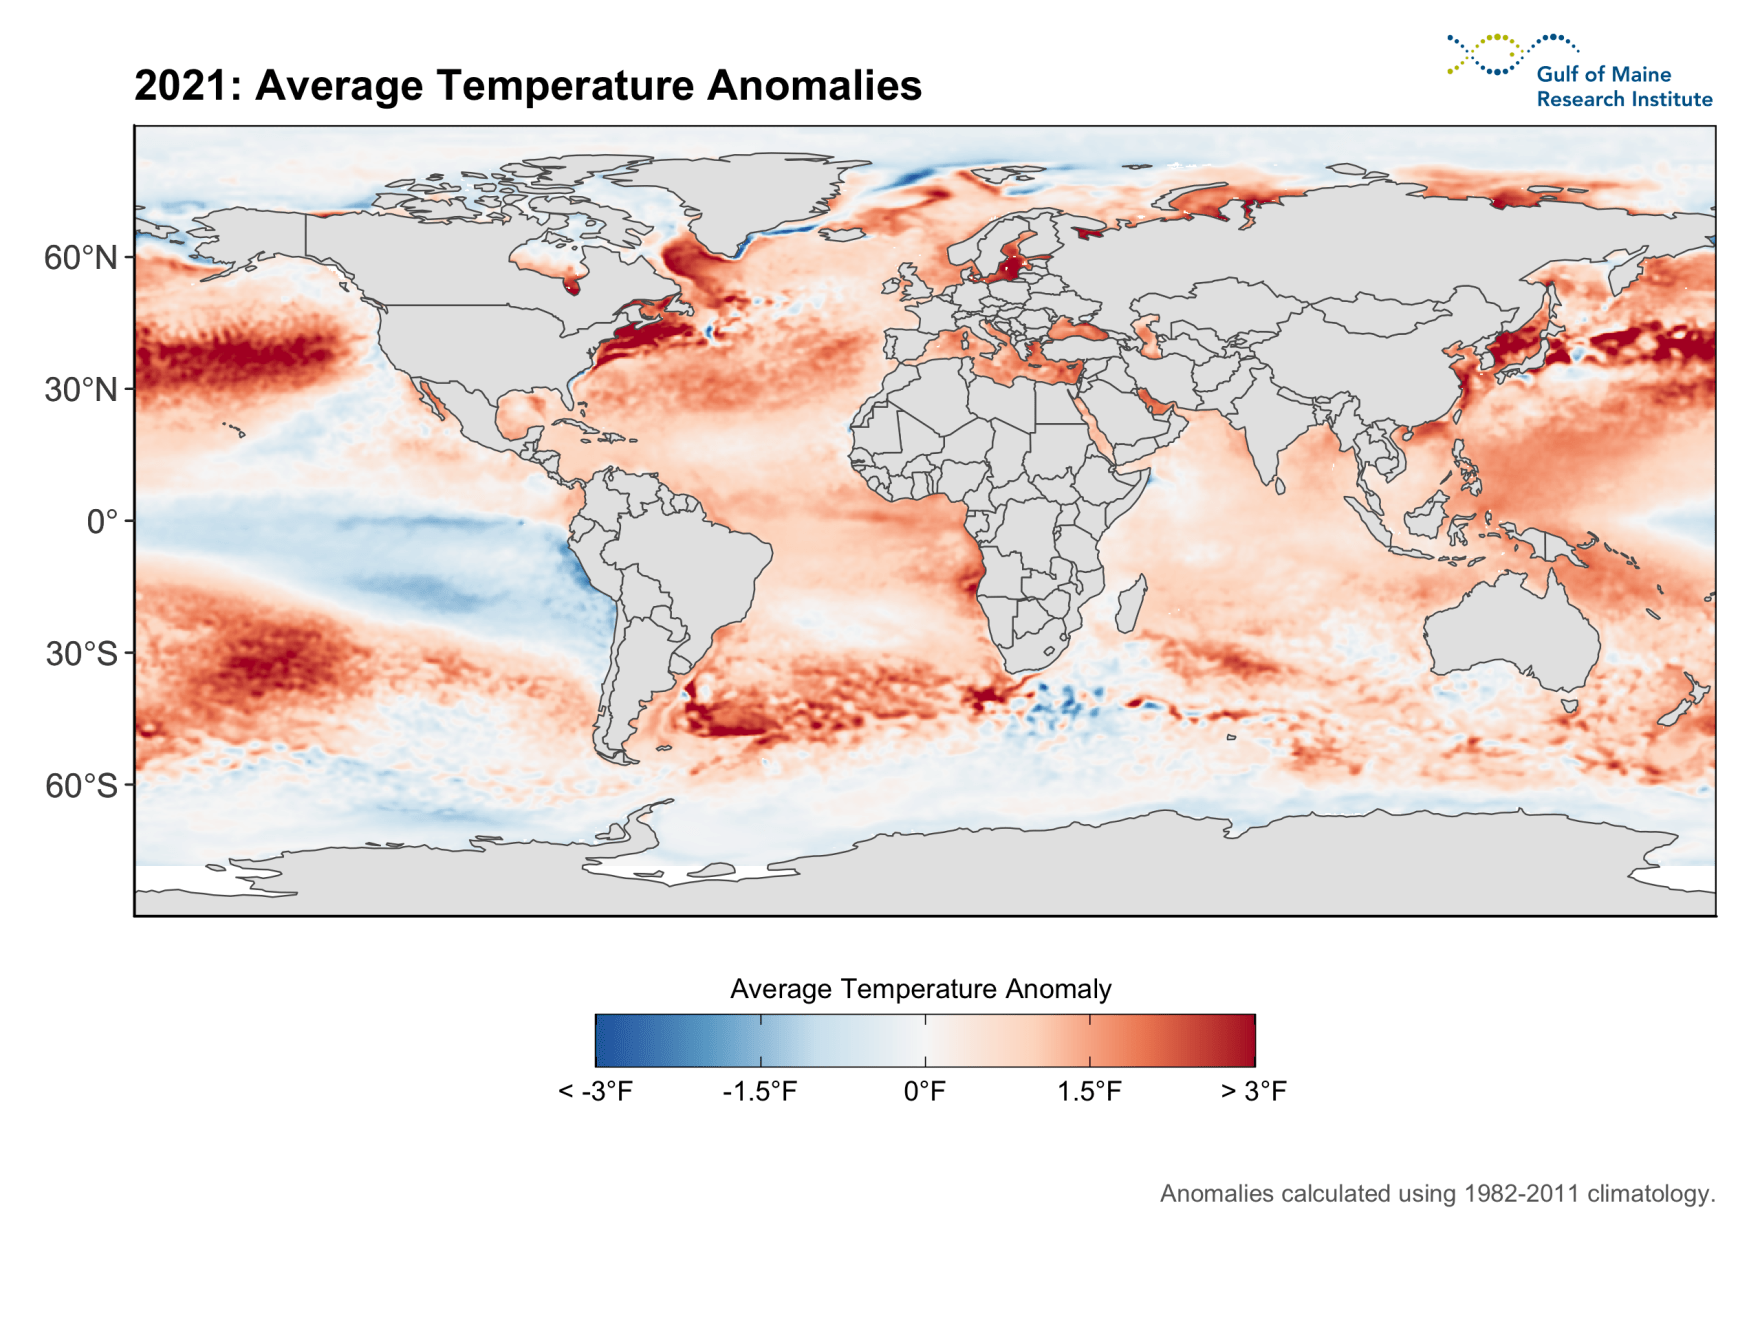 A graphic from the Gulf of Maine Research Institute highlights average temperature anomalies across the globe for 2021, with one of the most dramatic seen in the Gulf of Maine. (Gulf Of Maine Research Institute)